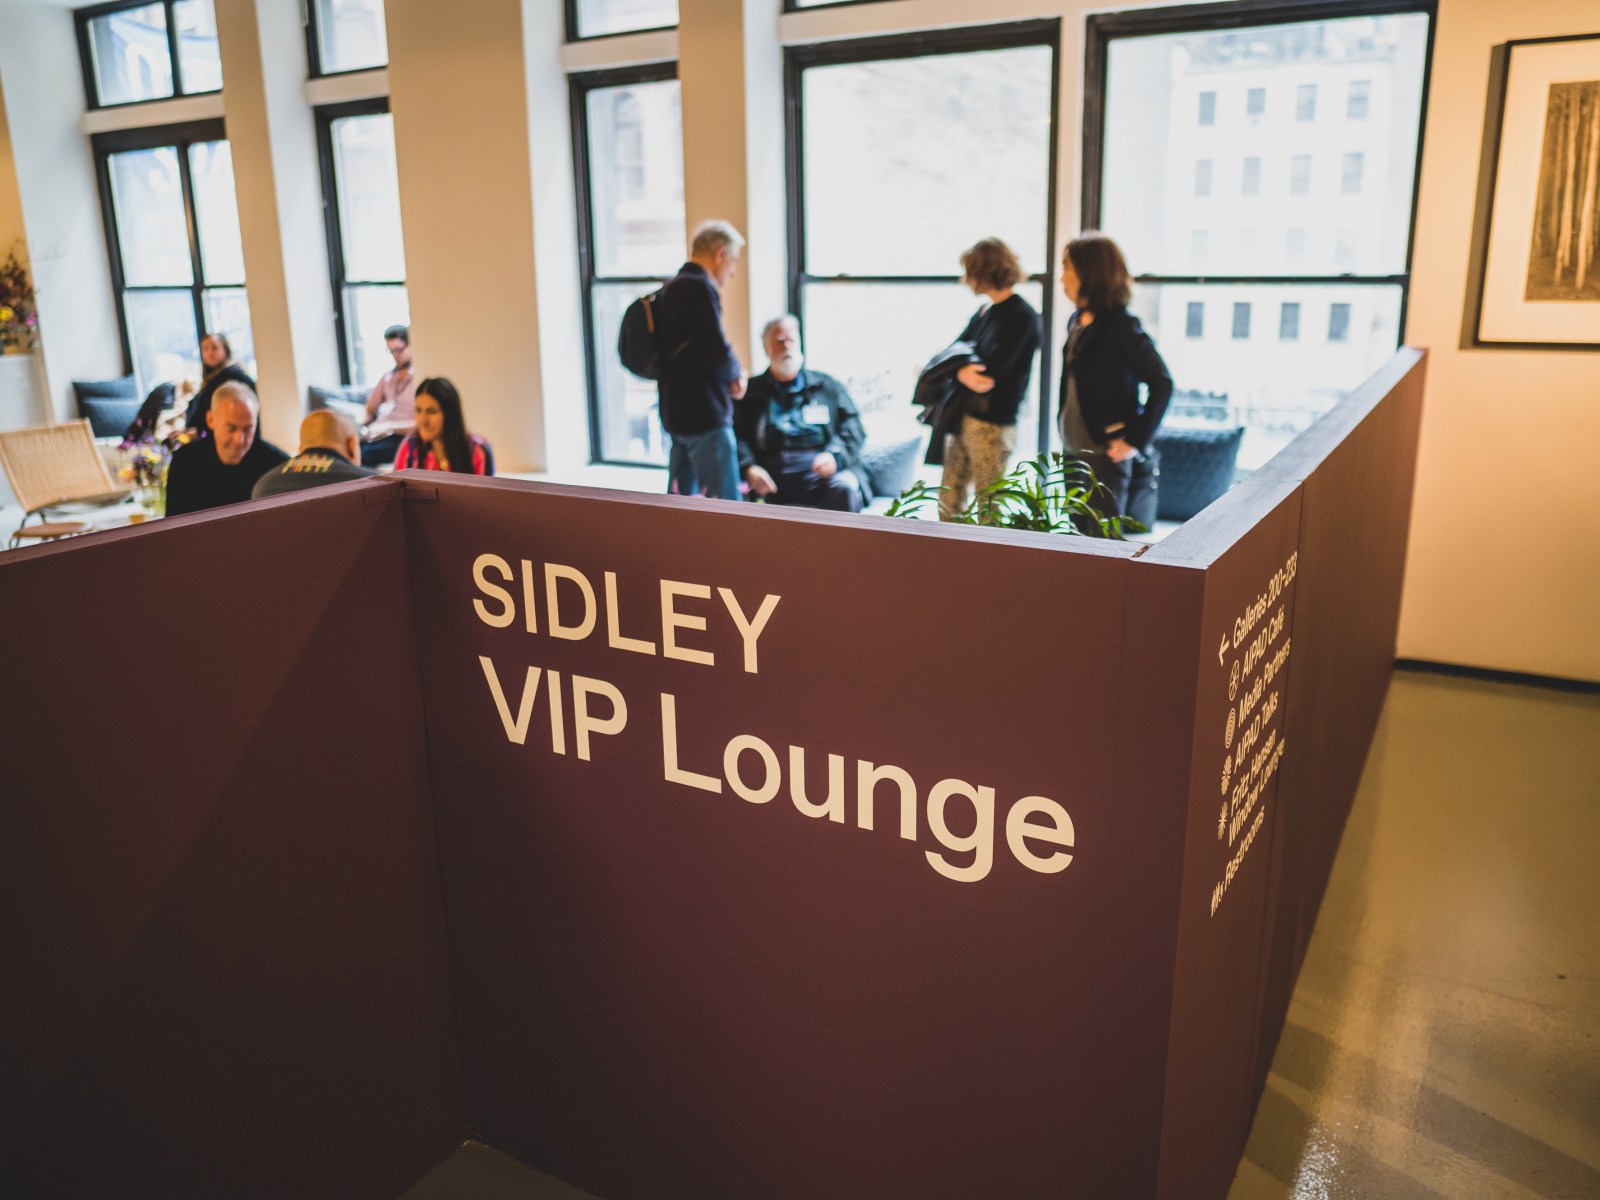 People sit and stand in the VIP Lounge at the 2023 Photography Show, with the Sidley name prominently featured.